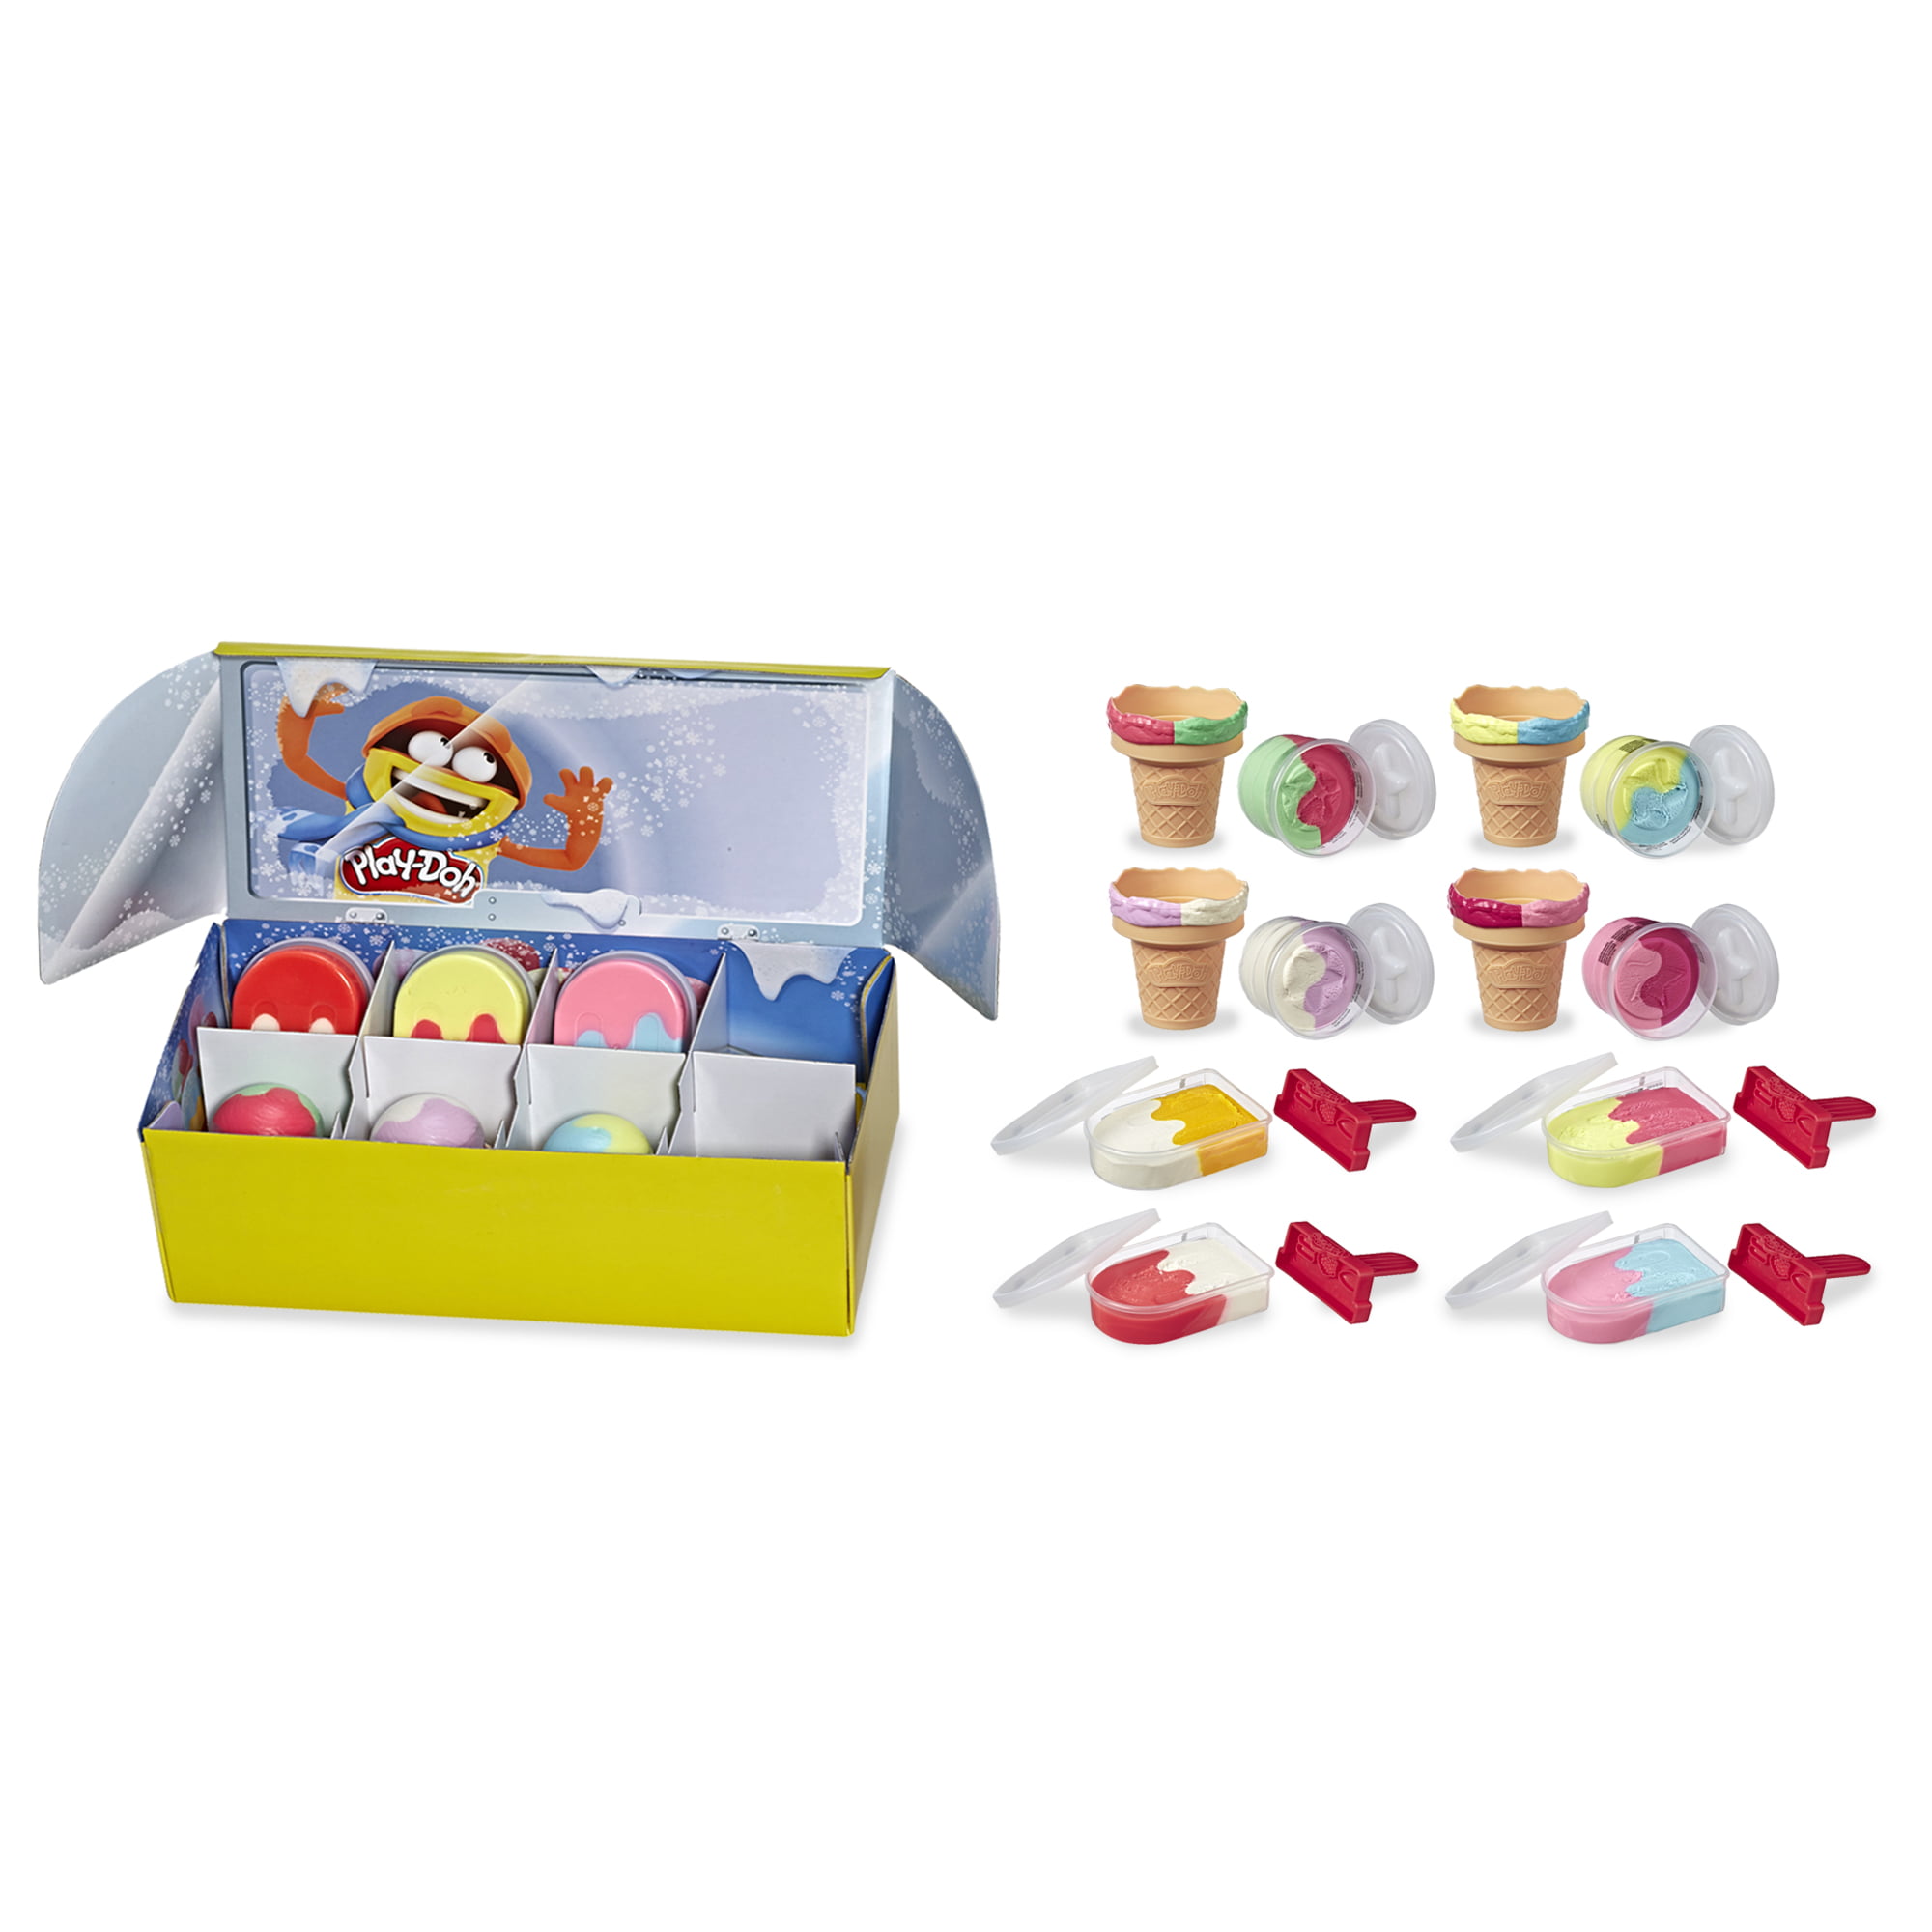 Play-Doh Sand or Play-Doh Variety Pack Gift Set Party Holiday Gift Kids 6 Pack 